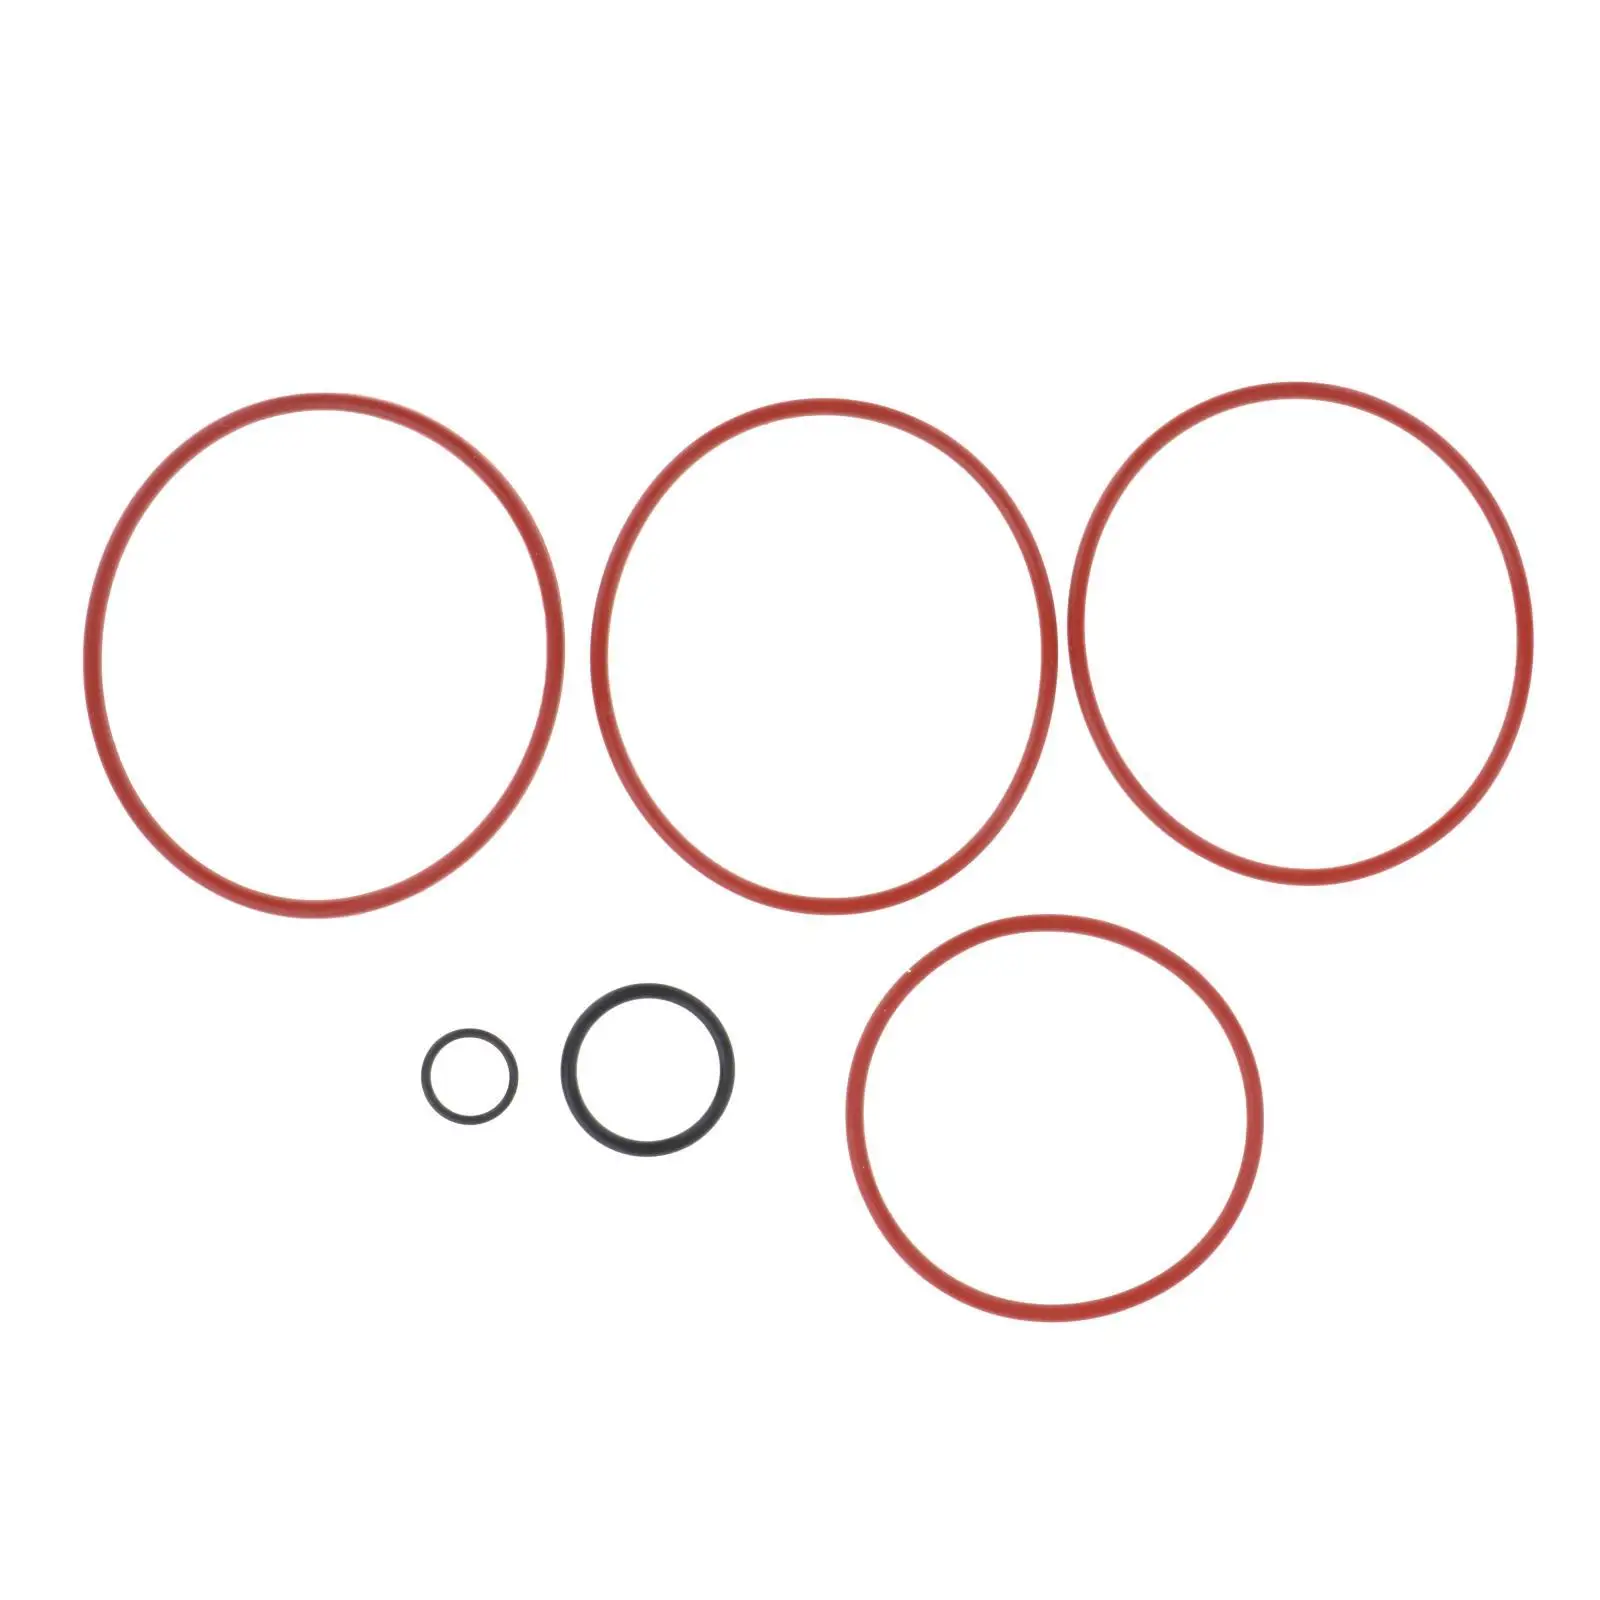 O-Ring Rebuild Kit Spare Parts Cooling Systems Easy to Install Leak-Resistant Seal Accessories Fit for Ford SVT 1996-2004